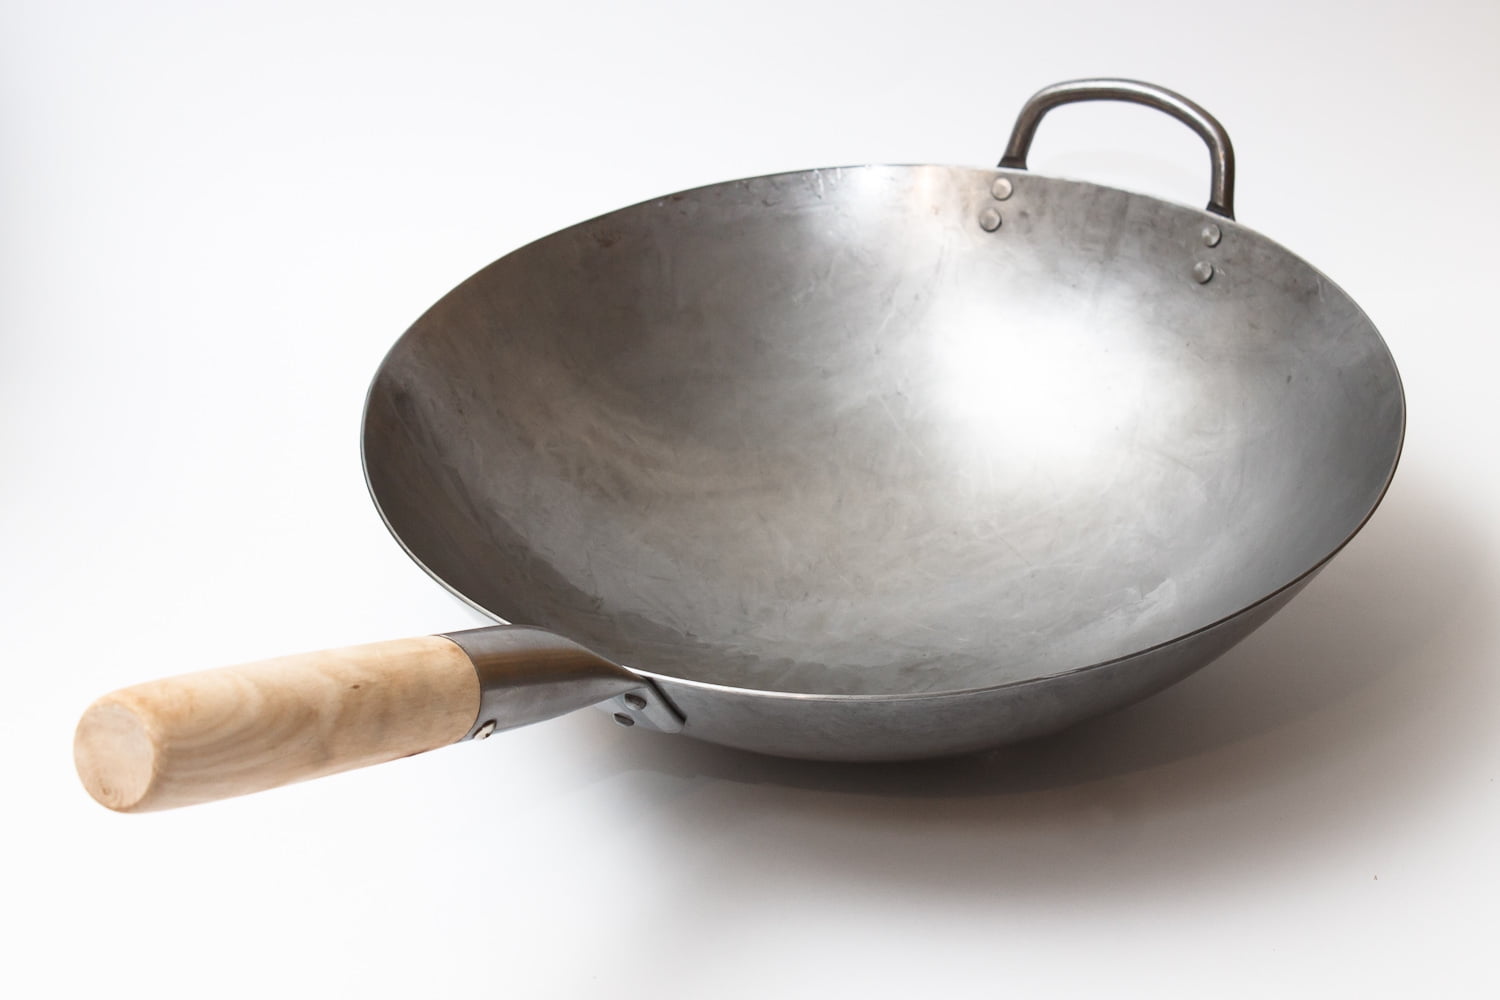  HHTD Large Wok for Cooking Old-Fashioned Traditional